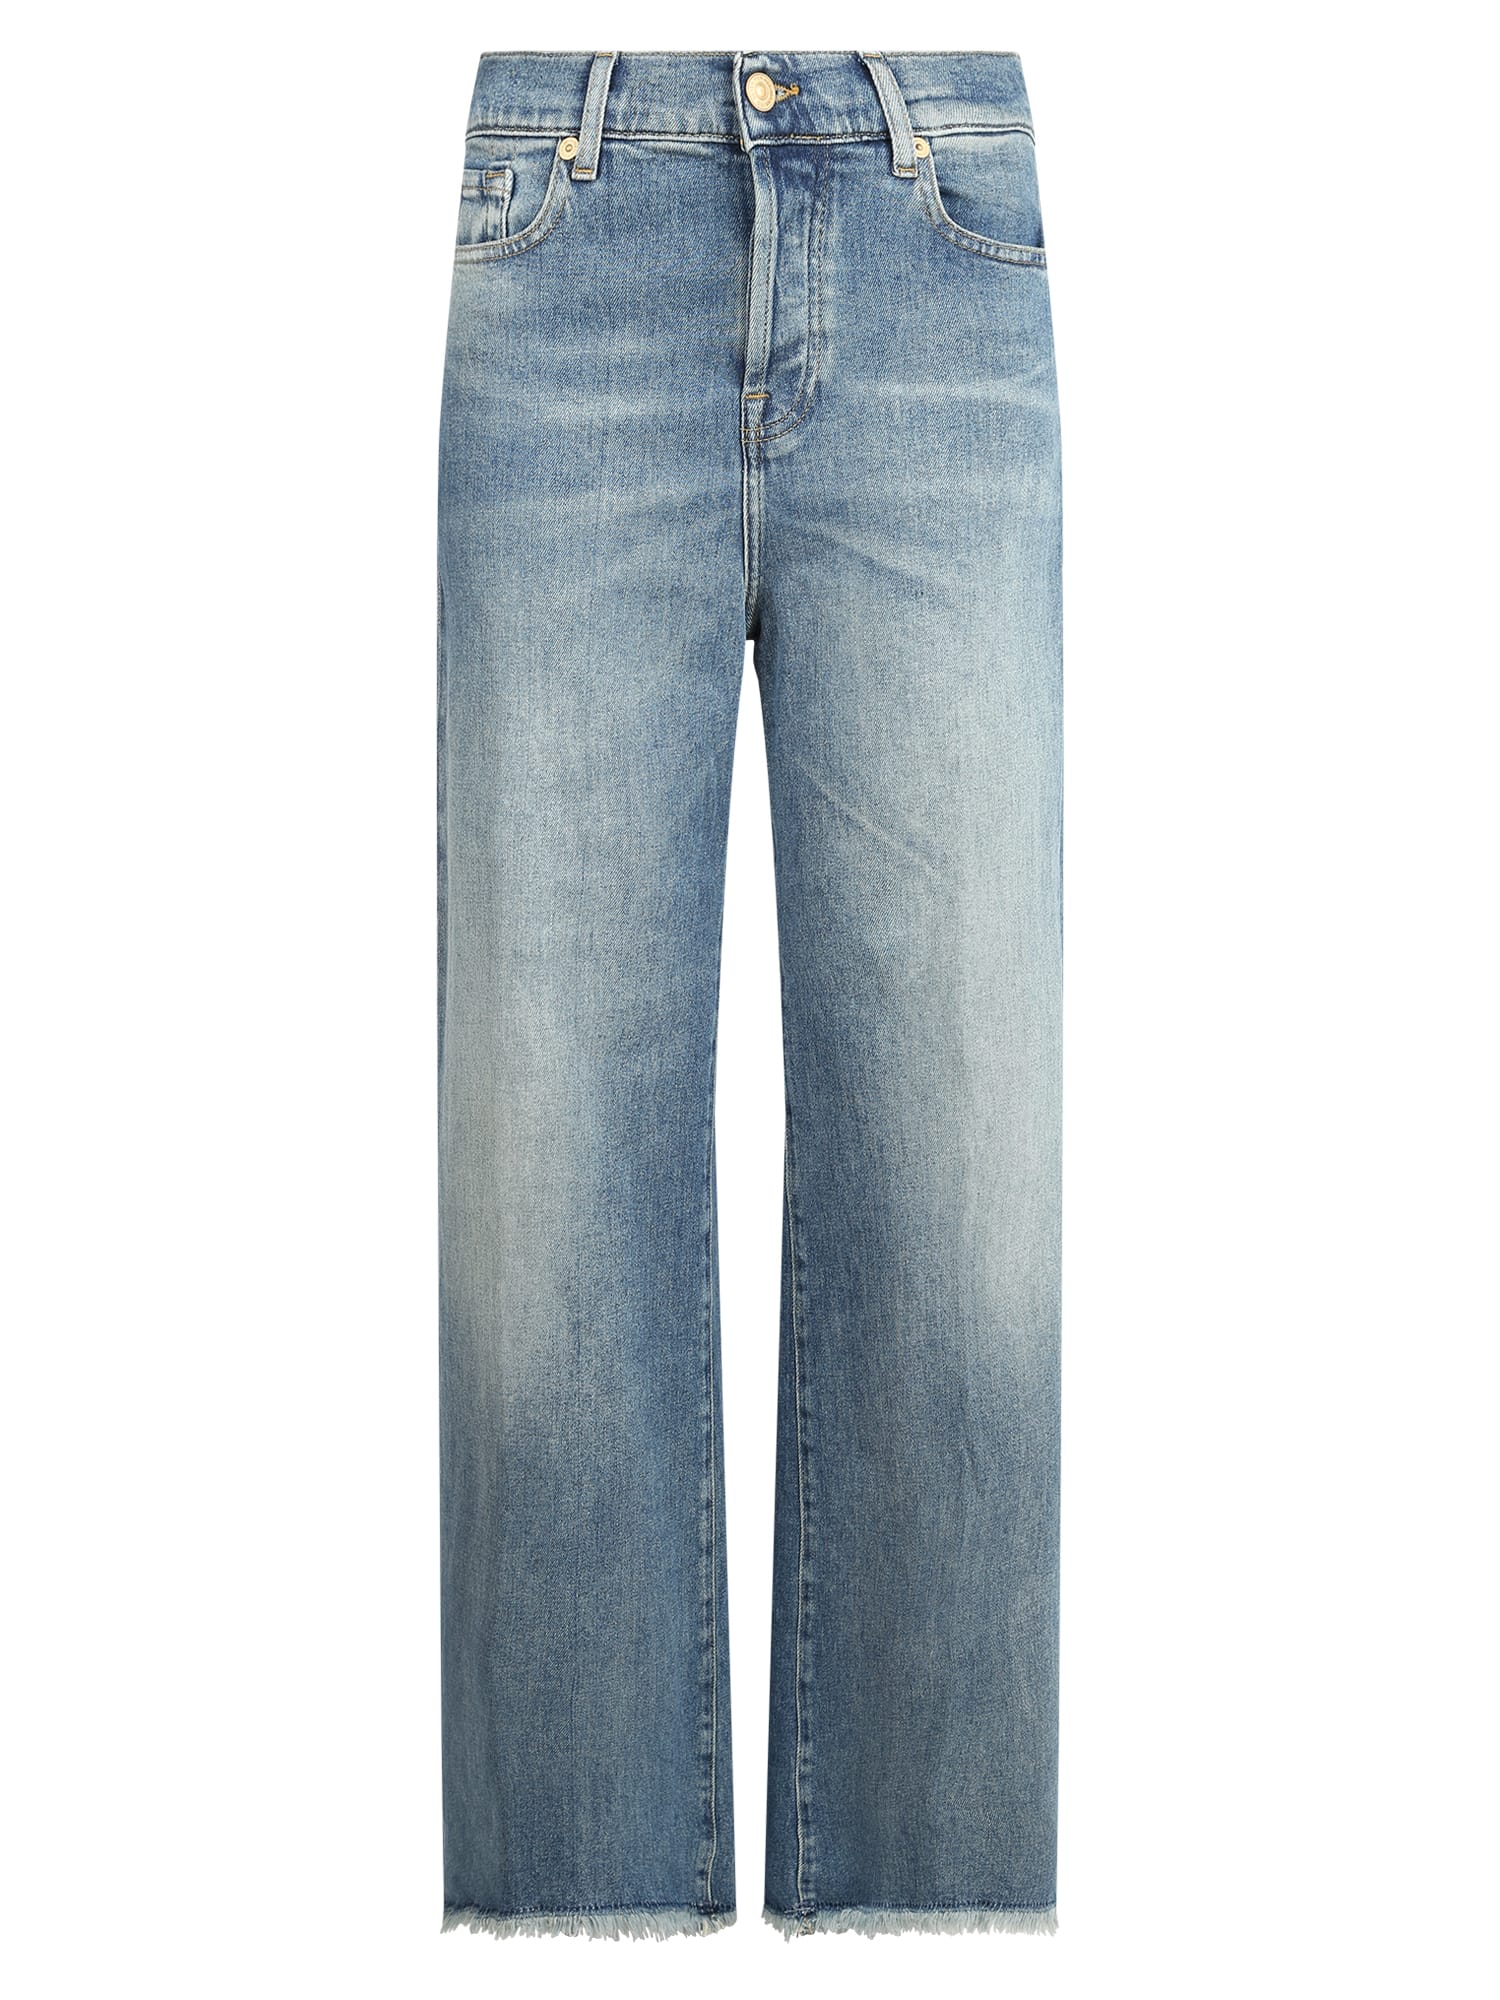 7 For All Mankind Zoey Denim Jeans